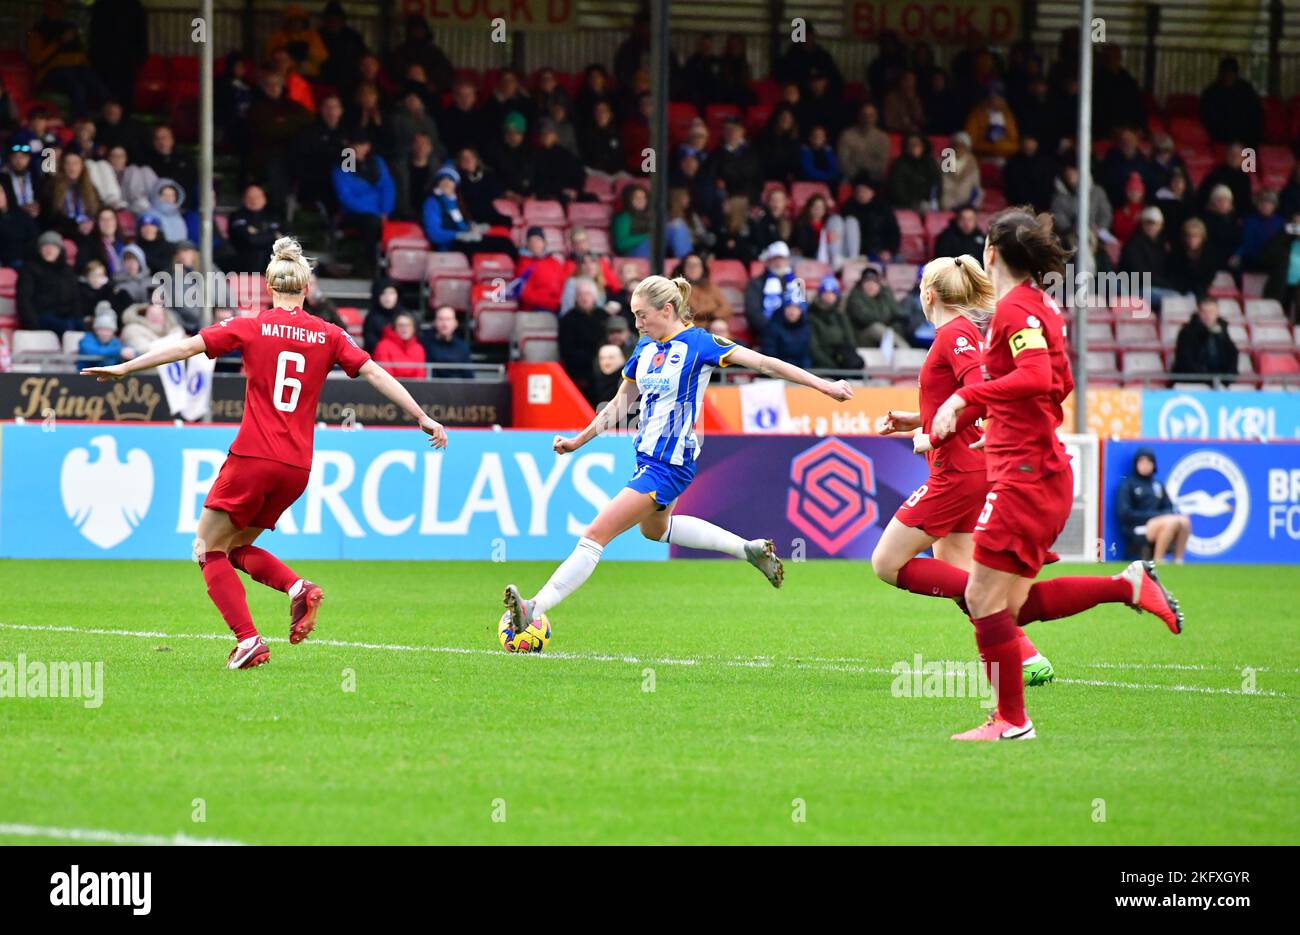 Crawley, UK. 20th Nov, 2022. Megan Connolly of Brighton and Hove Albion about to cross the ball during the FA Women's Super League match between Brighton & Hove Albion Women and Liverpool Women at The People's Pension Stadium on November 20th 2022 in Crawley, United Kingdom. (Photo by Jeff Mood/phcimages.com) Credit: PHC Images/Alamy Live News Stock Photo